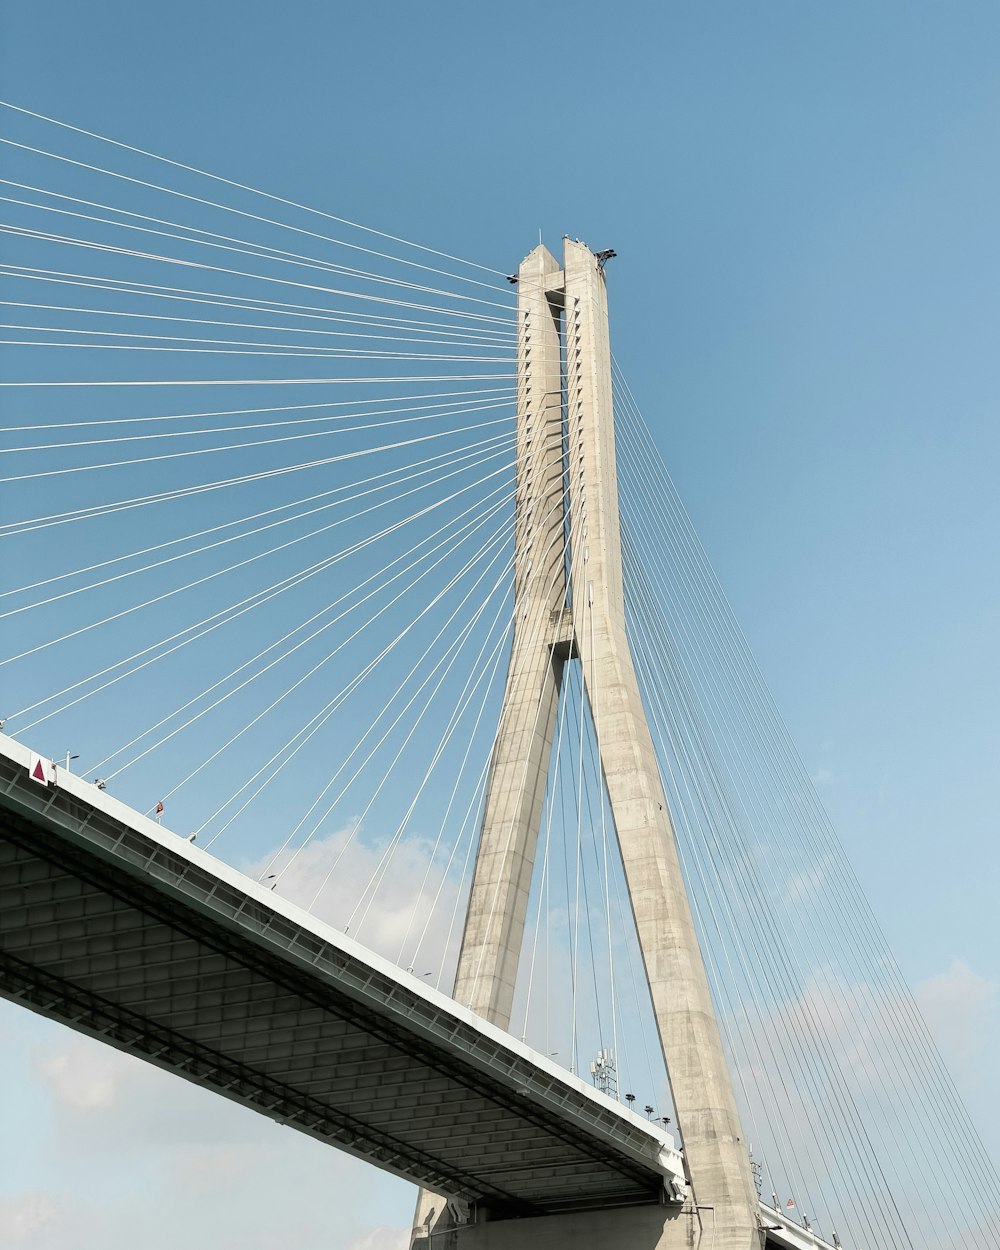 a very tall bridge with a very tall tower